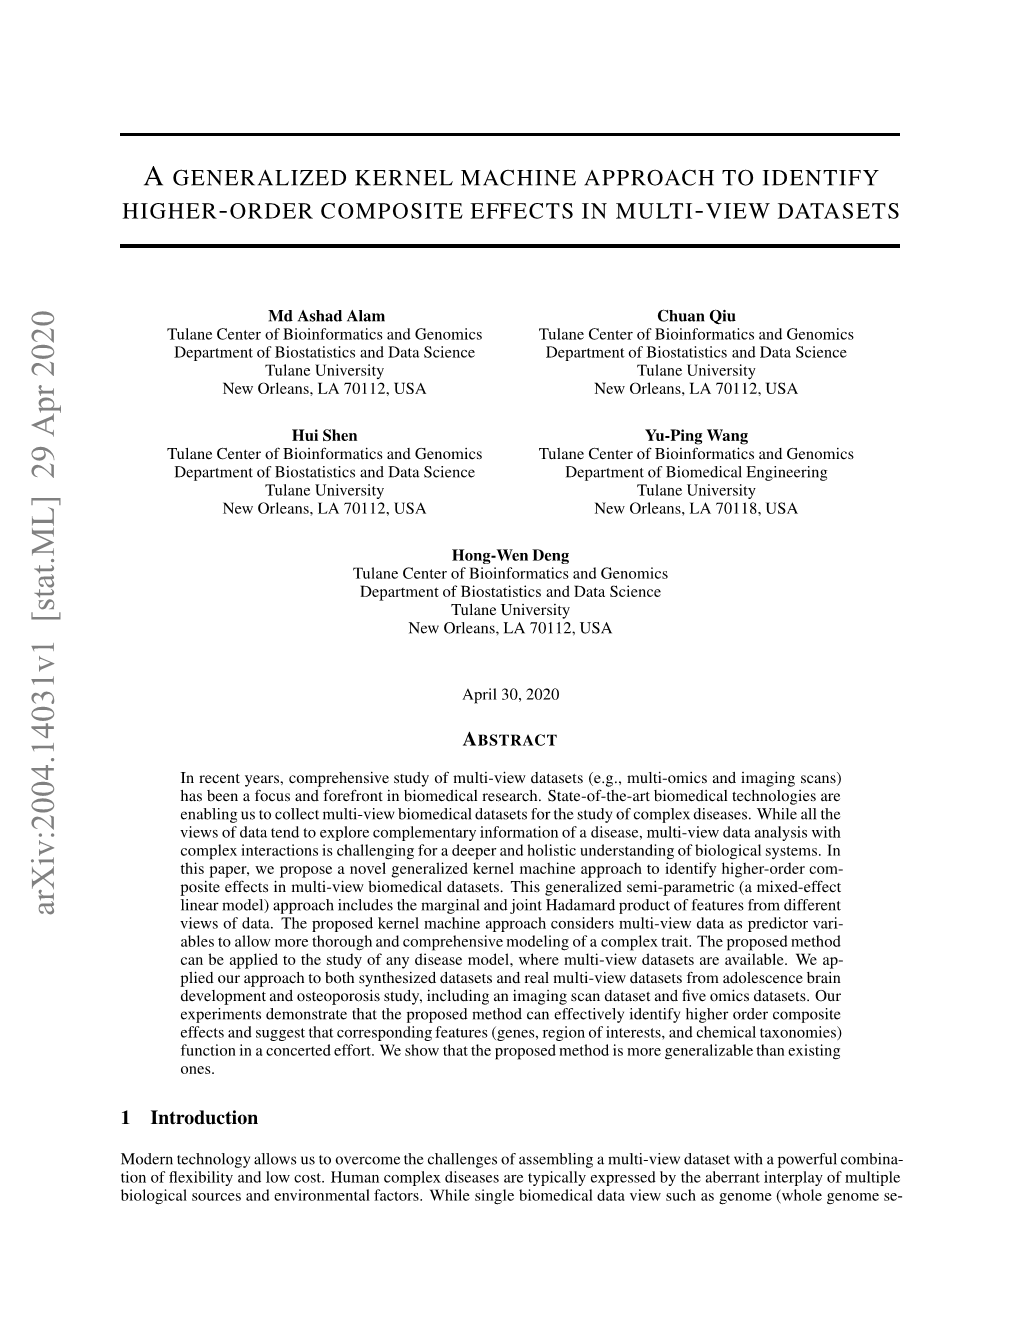 A Generalized Kernel Machine Approach to Identify Higher-Order Composite Effects (GKMAHCE) in Multi-View Datasets